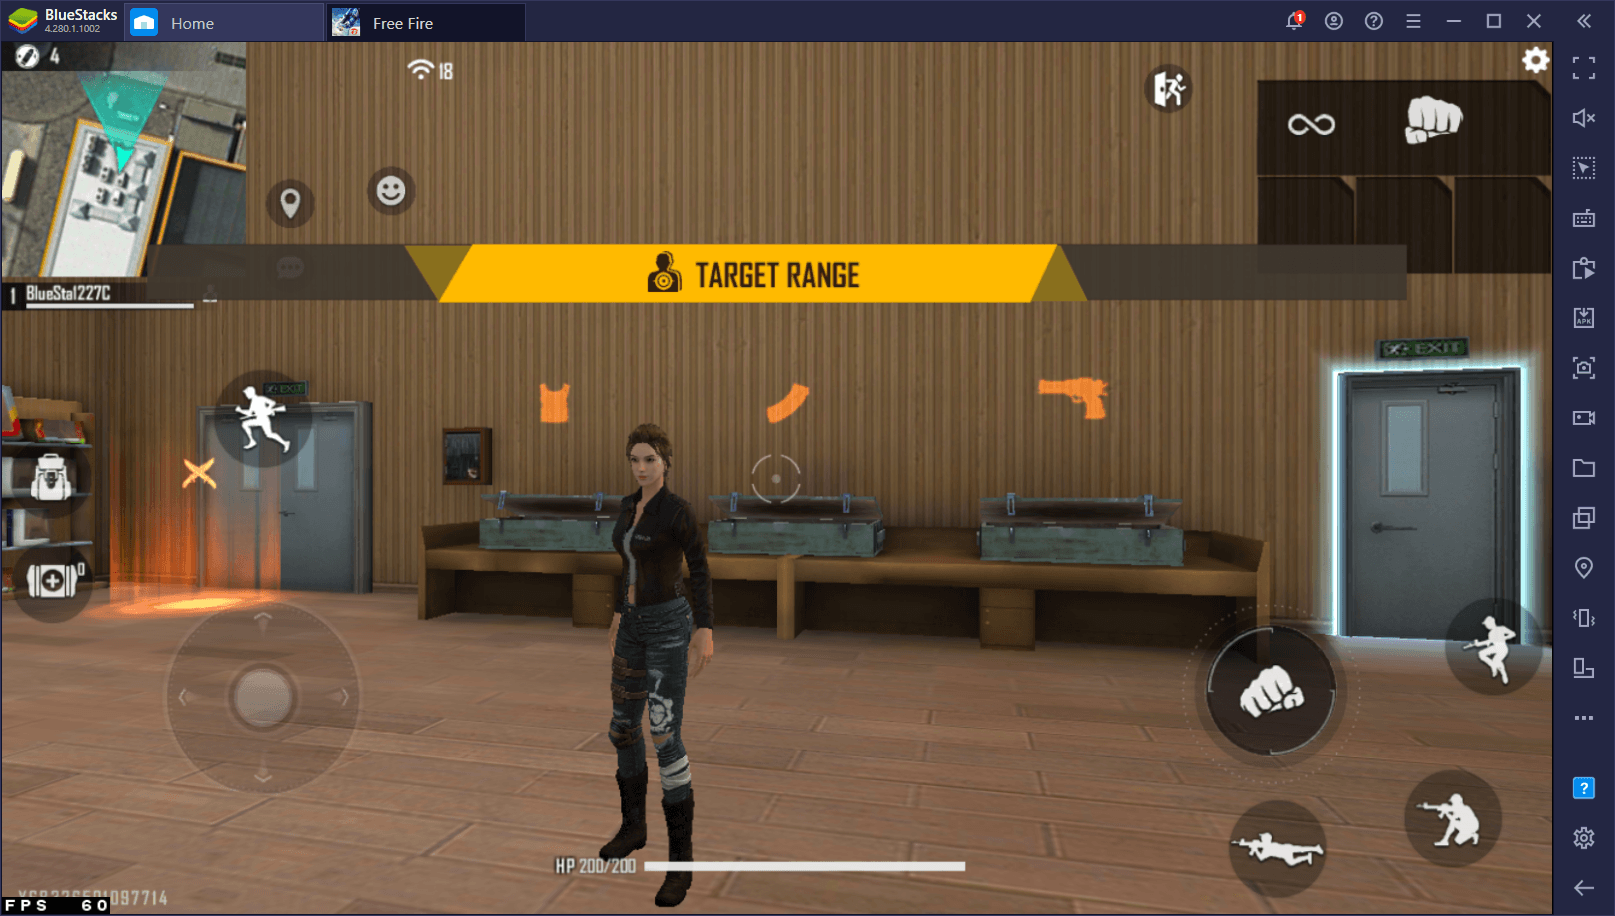 4 Reasons Why You Should Move to BlueStacks 5 to Get the Best Experience with Free Fire